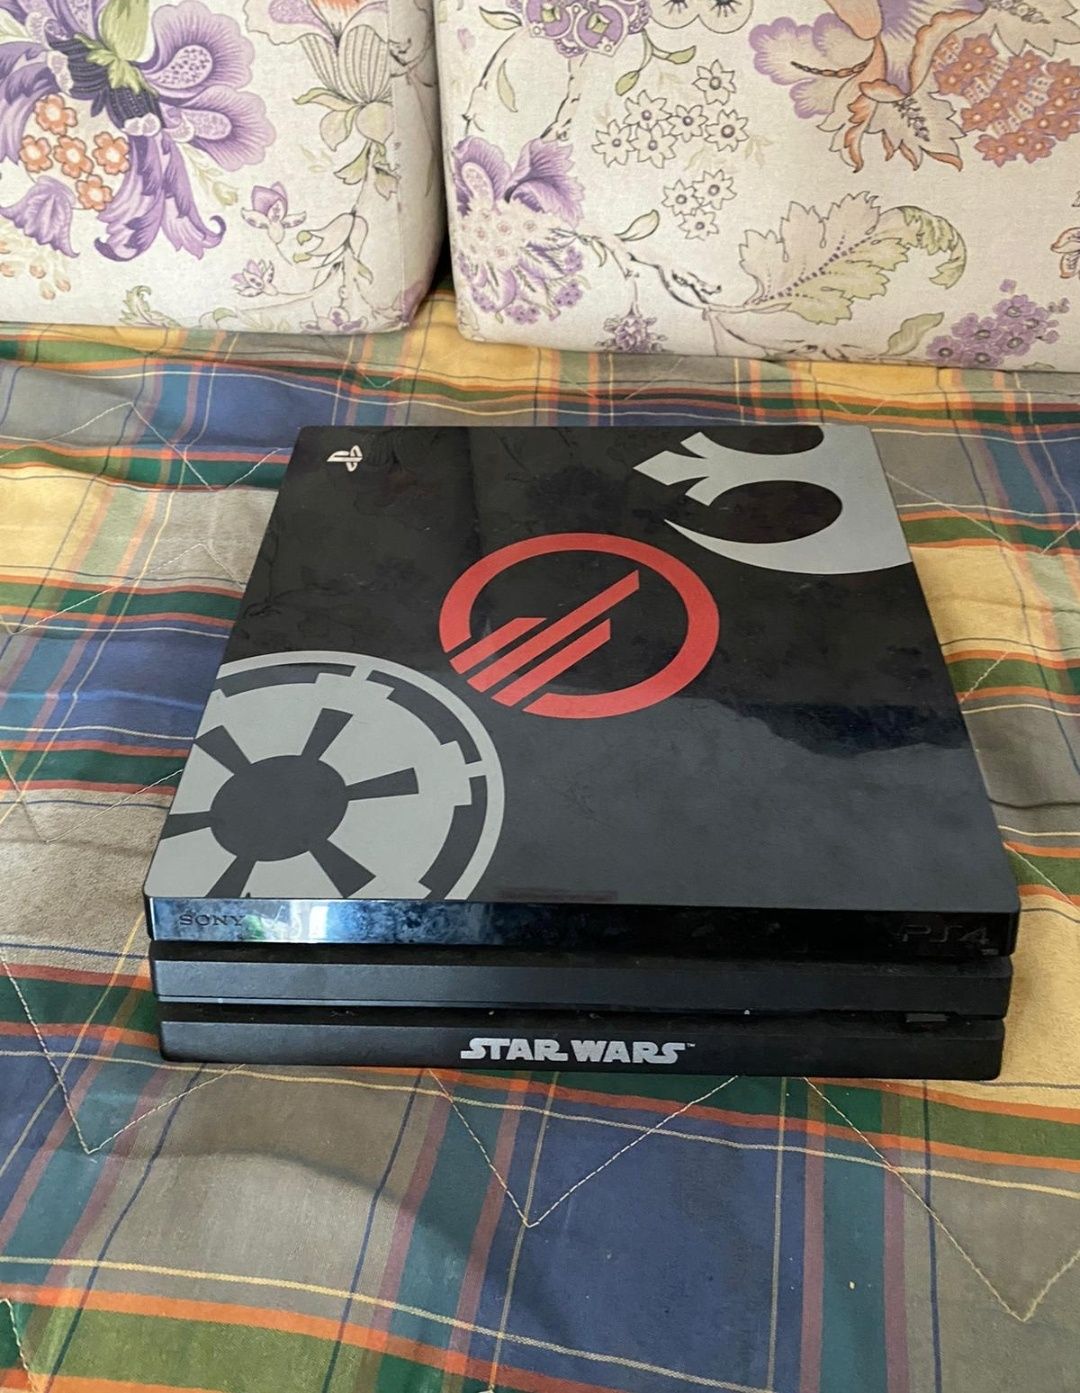 Ps4 Pro Star Wars edition